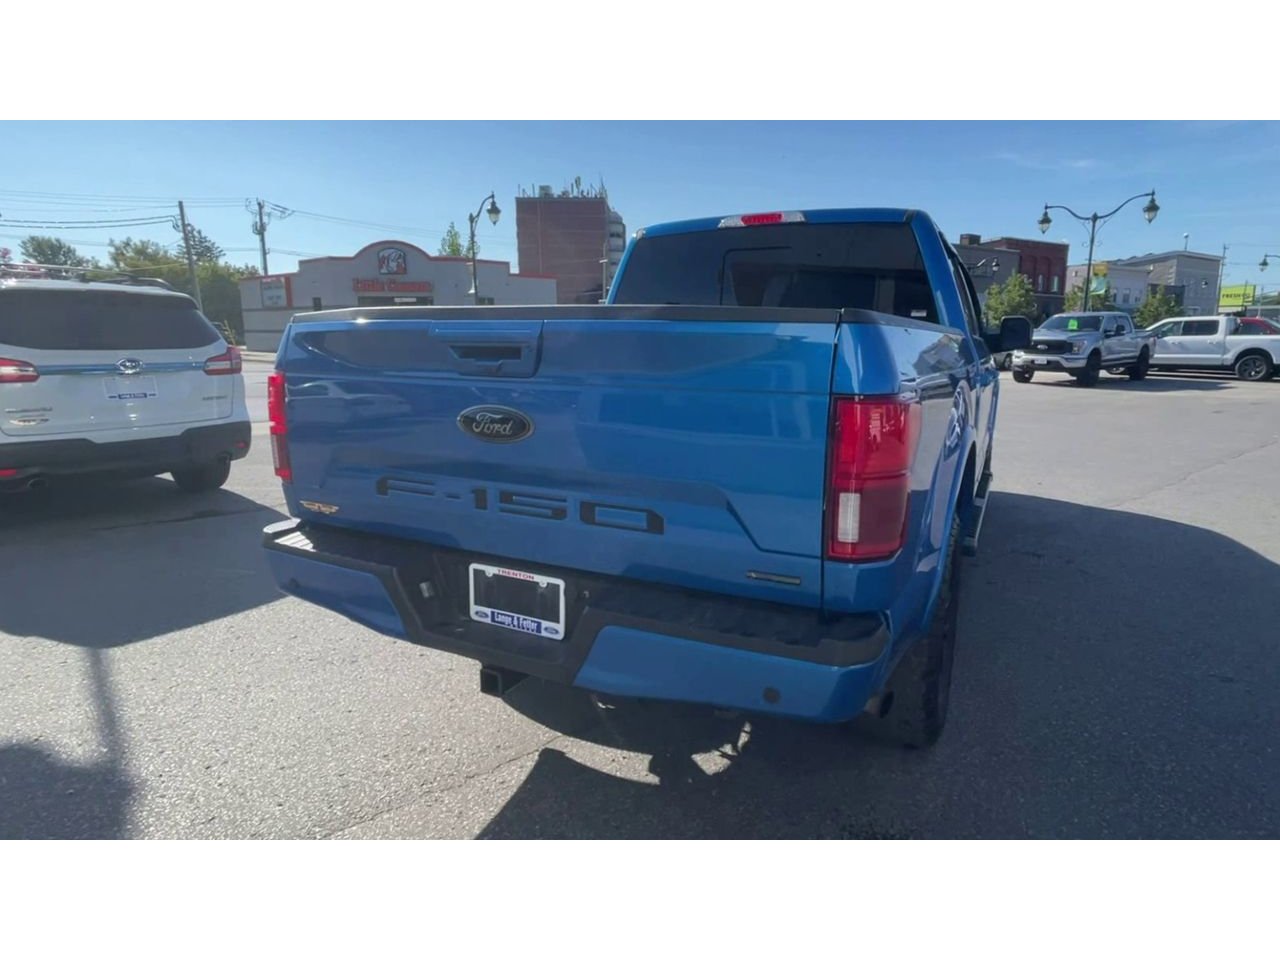 2020 Ford F-150 - 21299A Full Image 8